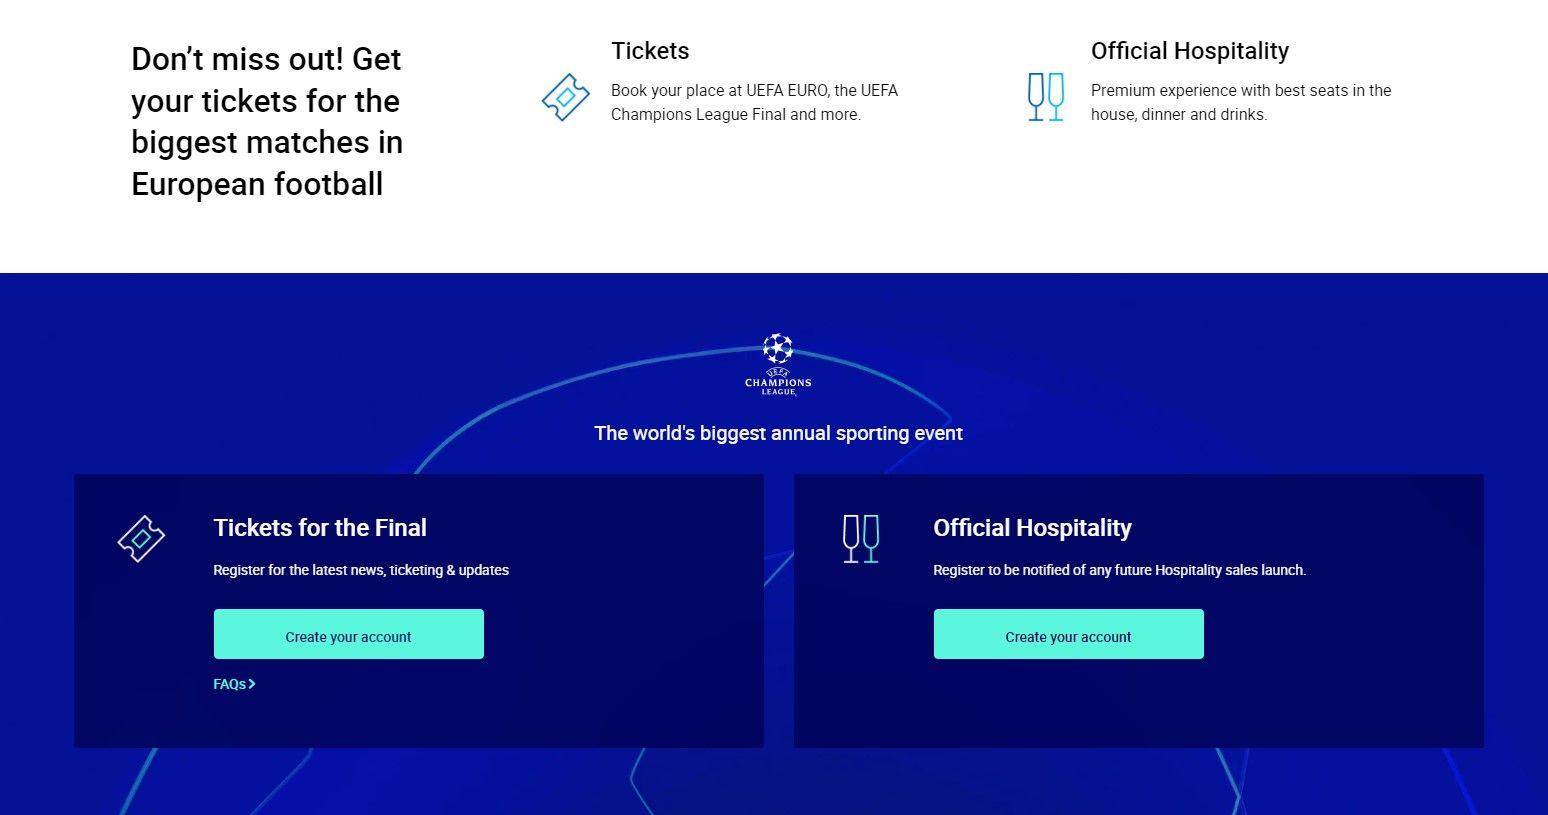 UEFA Champions League tickets webpage advertising tickets to the final and hospitality packages.